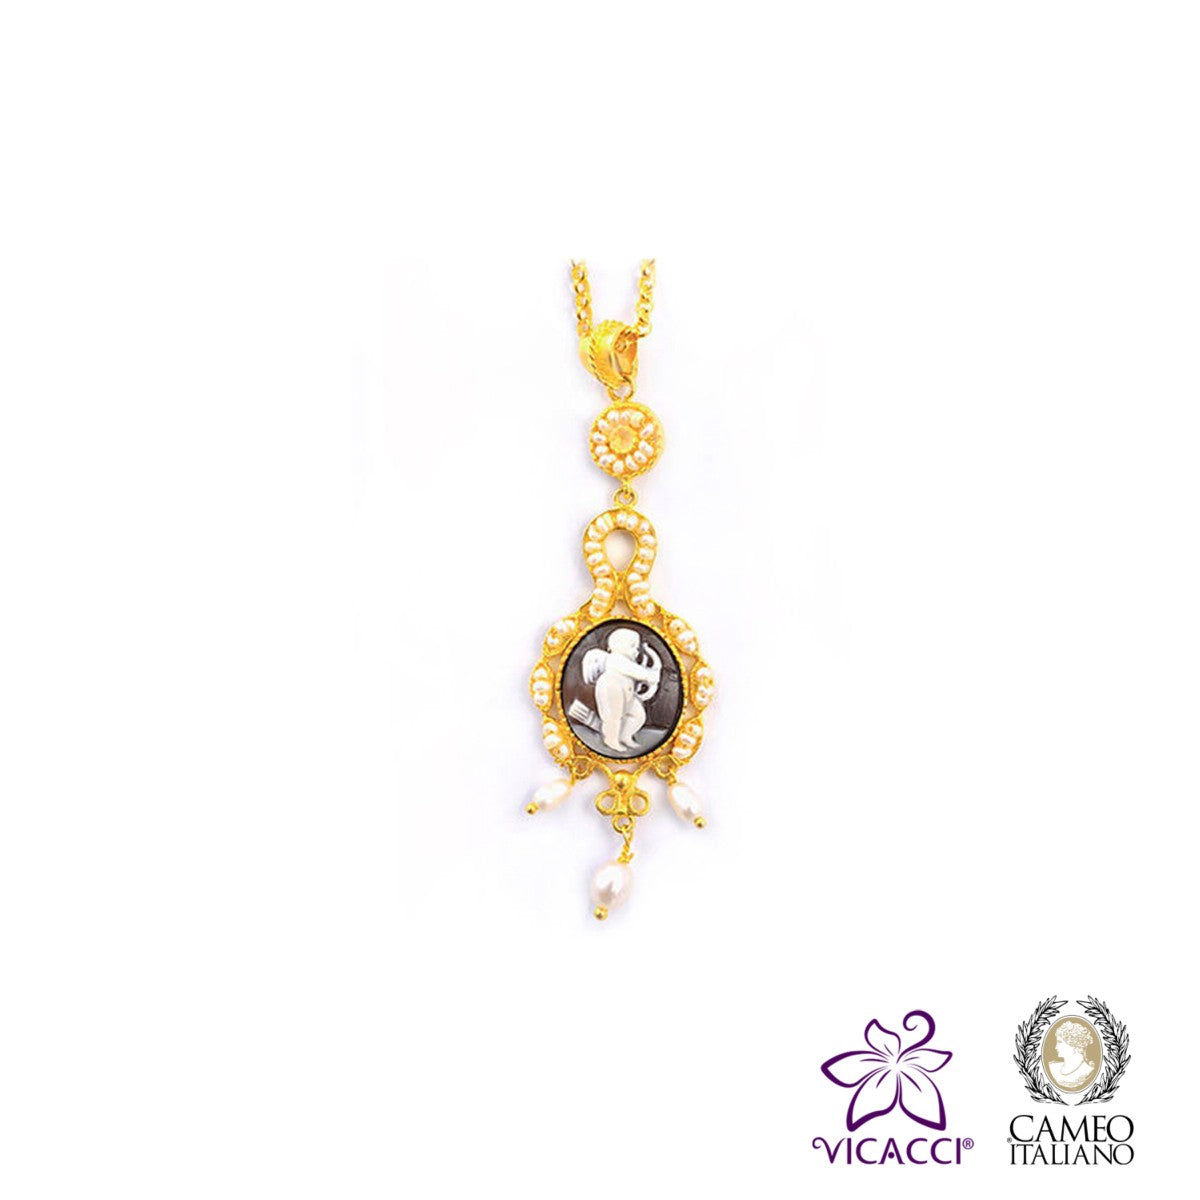 Cameo Italiano, P903 Pendant , Gold Plated Sterling Silver